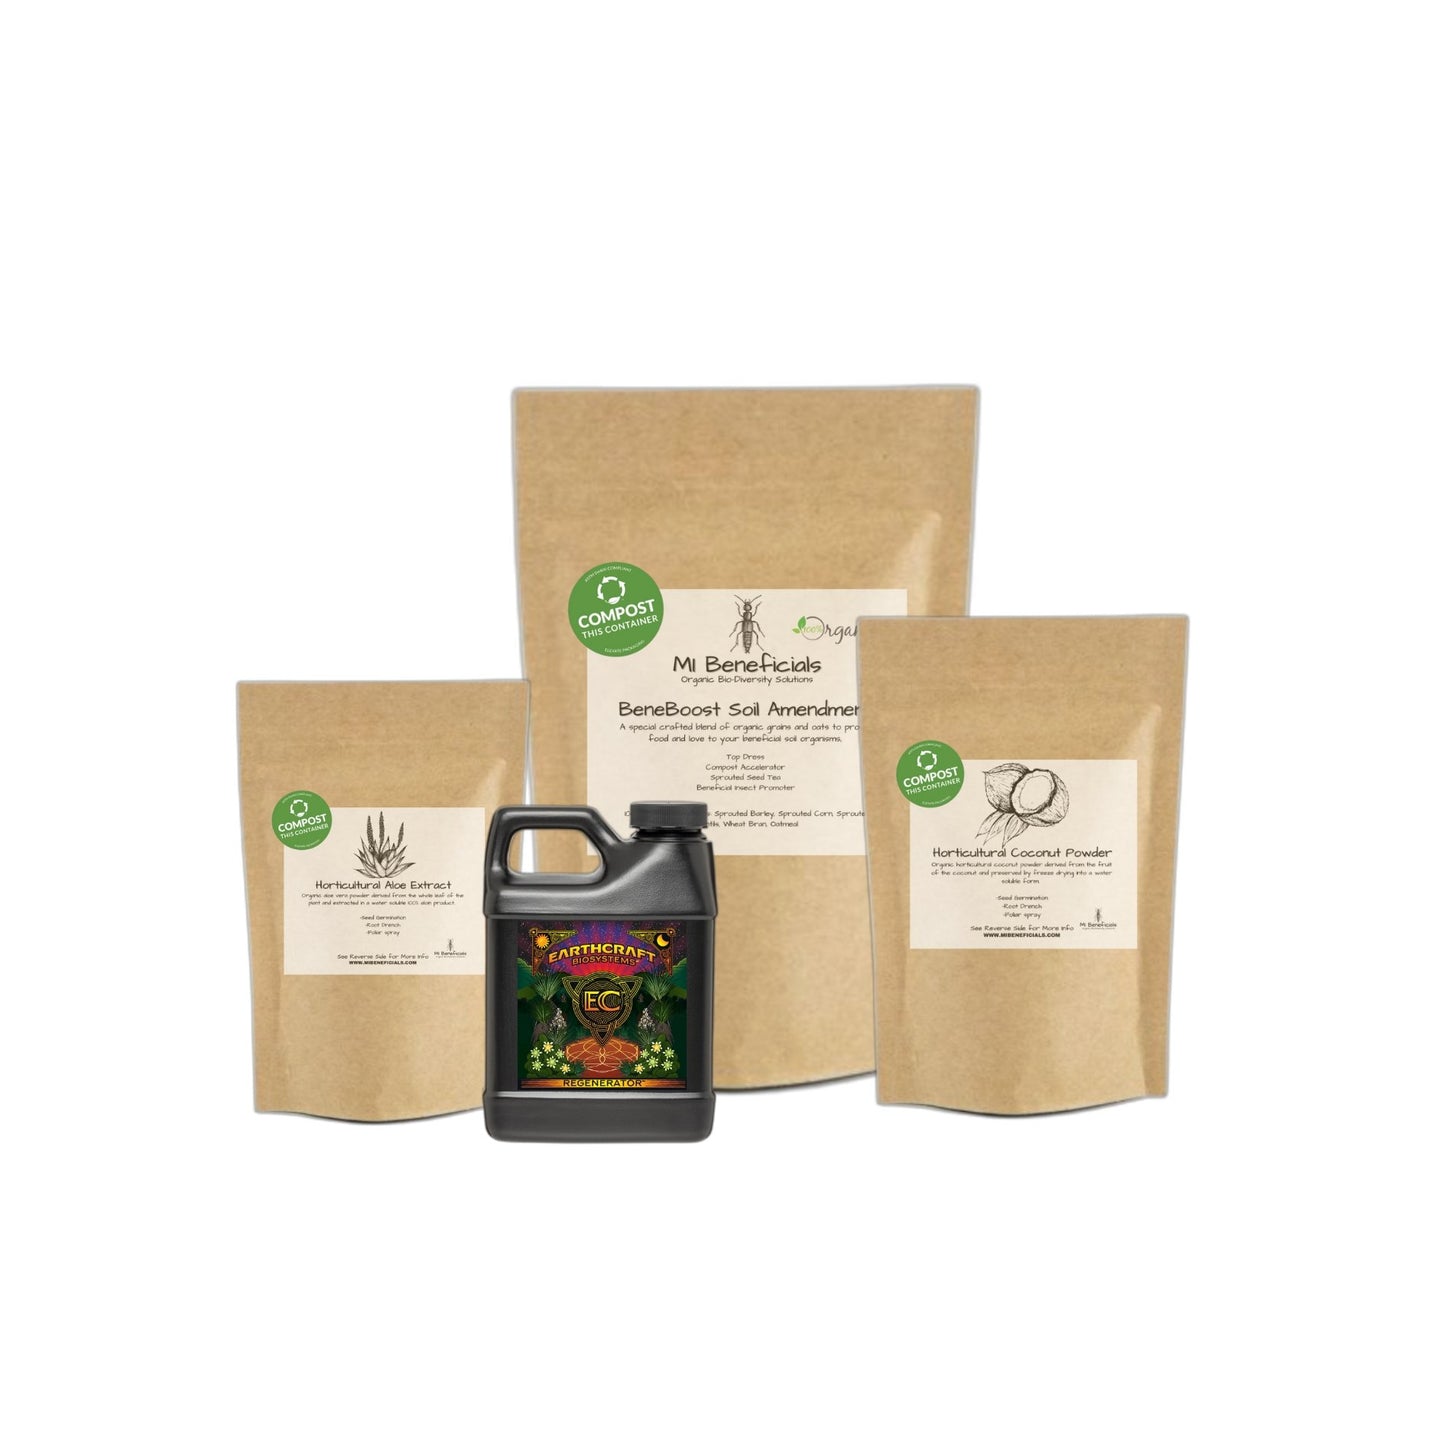 This living soil starter kit contains quillaja/yucca, aloe, coconut powder and Beneboost soil amendment